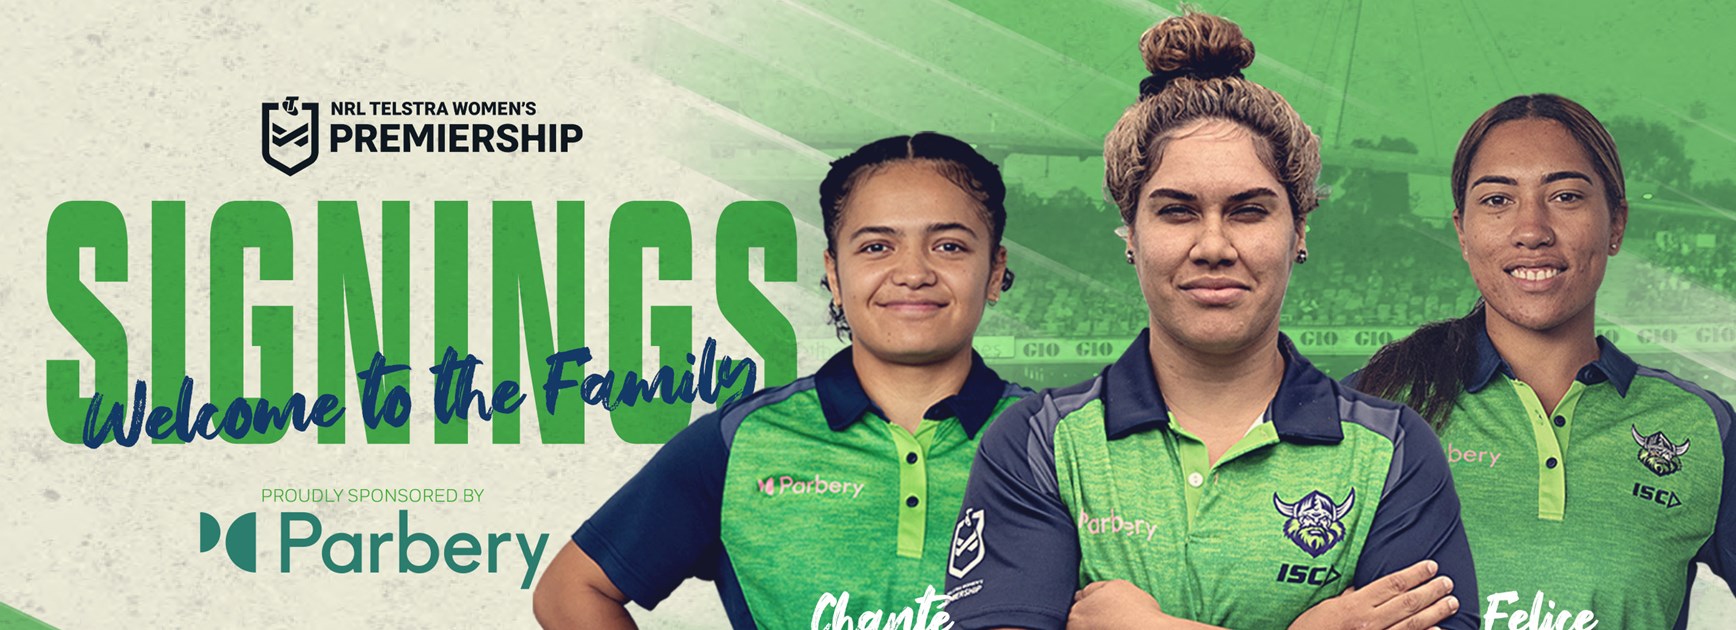 Raiders add three more players to NRLW roster